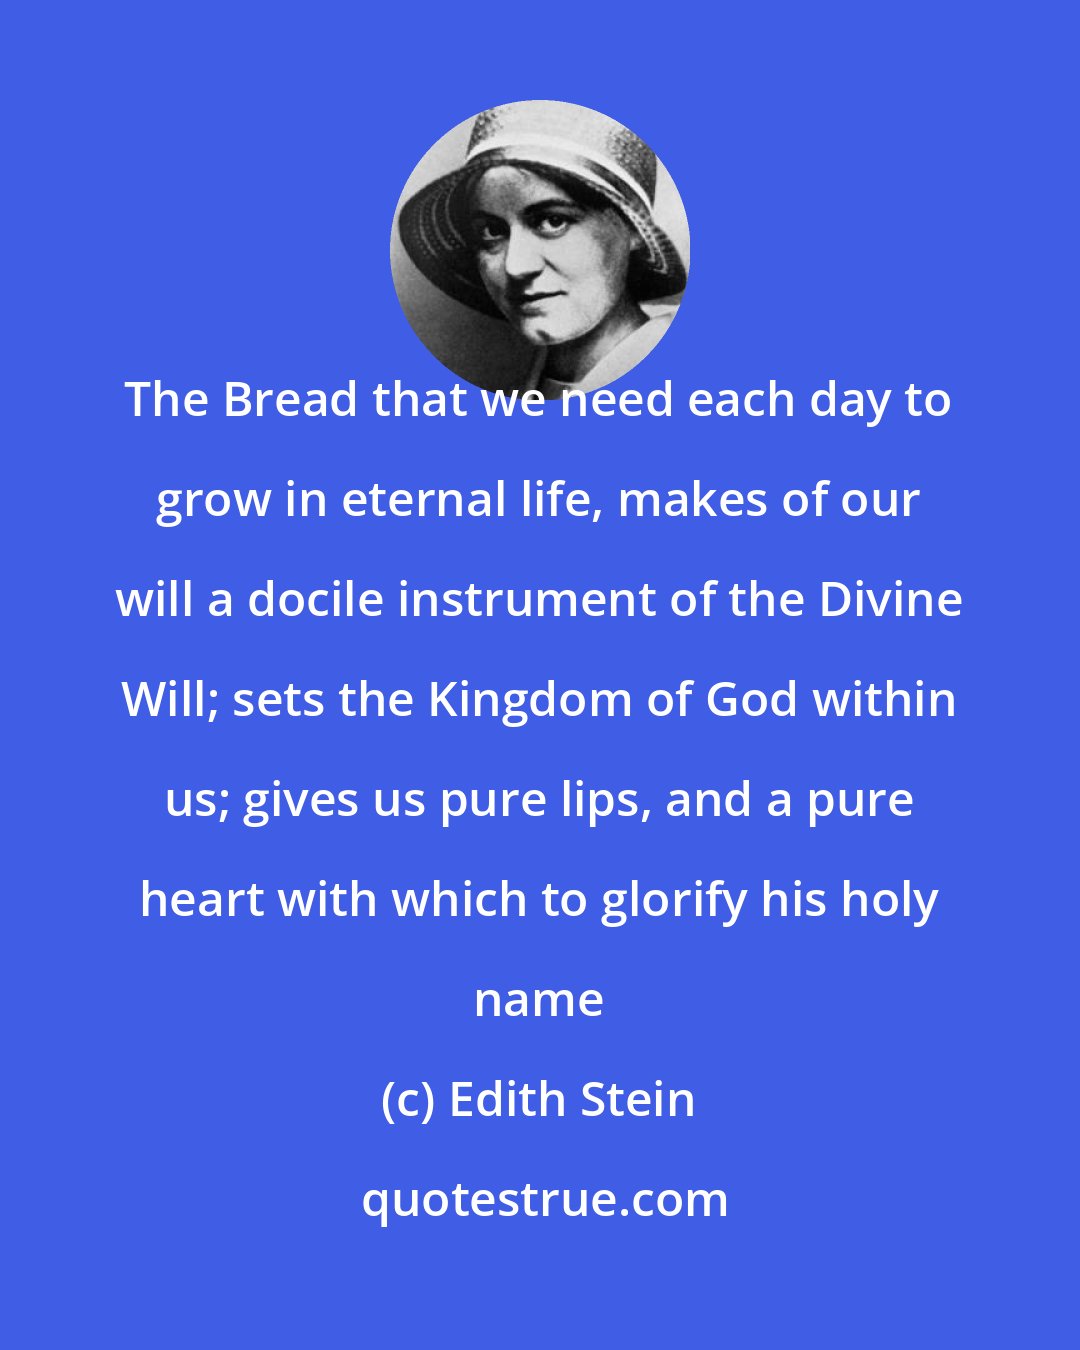 Edith Stein: The Bread that we need each day to grow in eternal life, makes of our will a docile instrument of the Divine Will; sets the Kingdom of God within us; gives us pure lips, and a pure heart with which to glorify his holy name